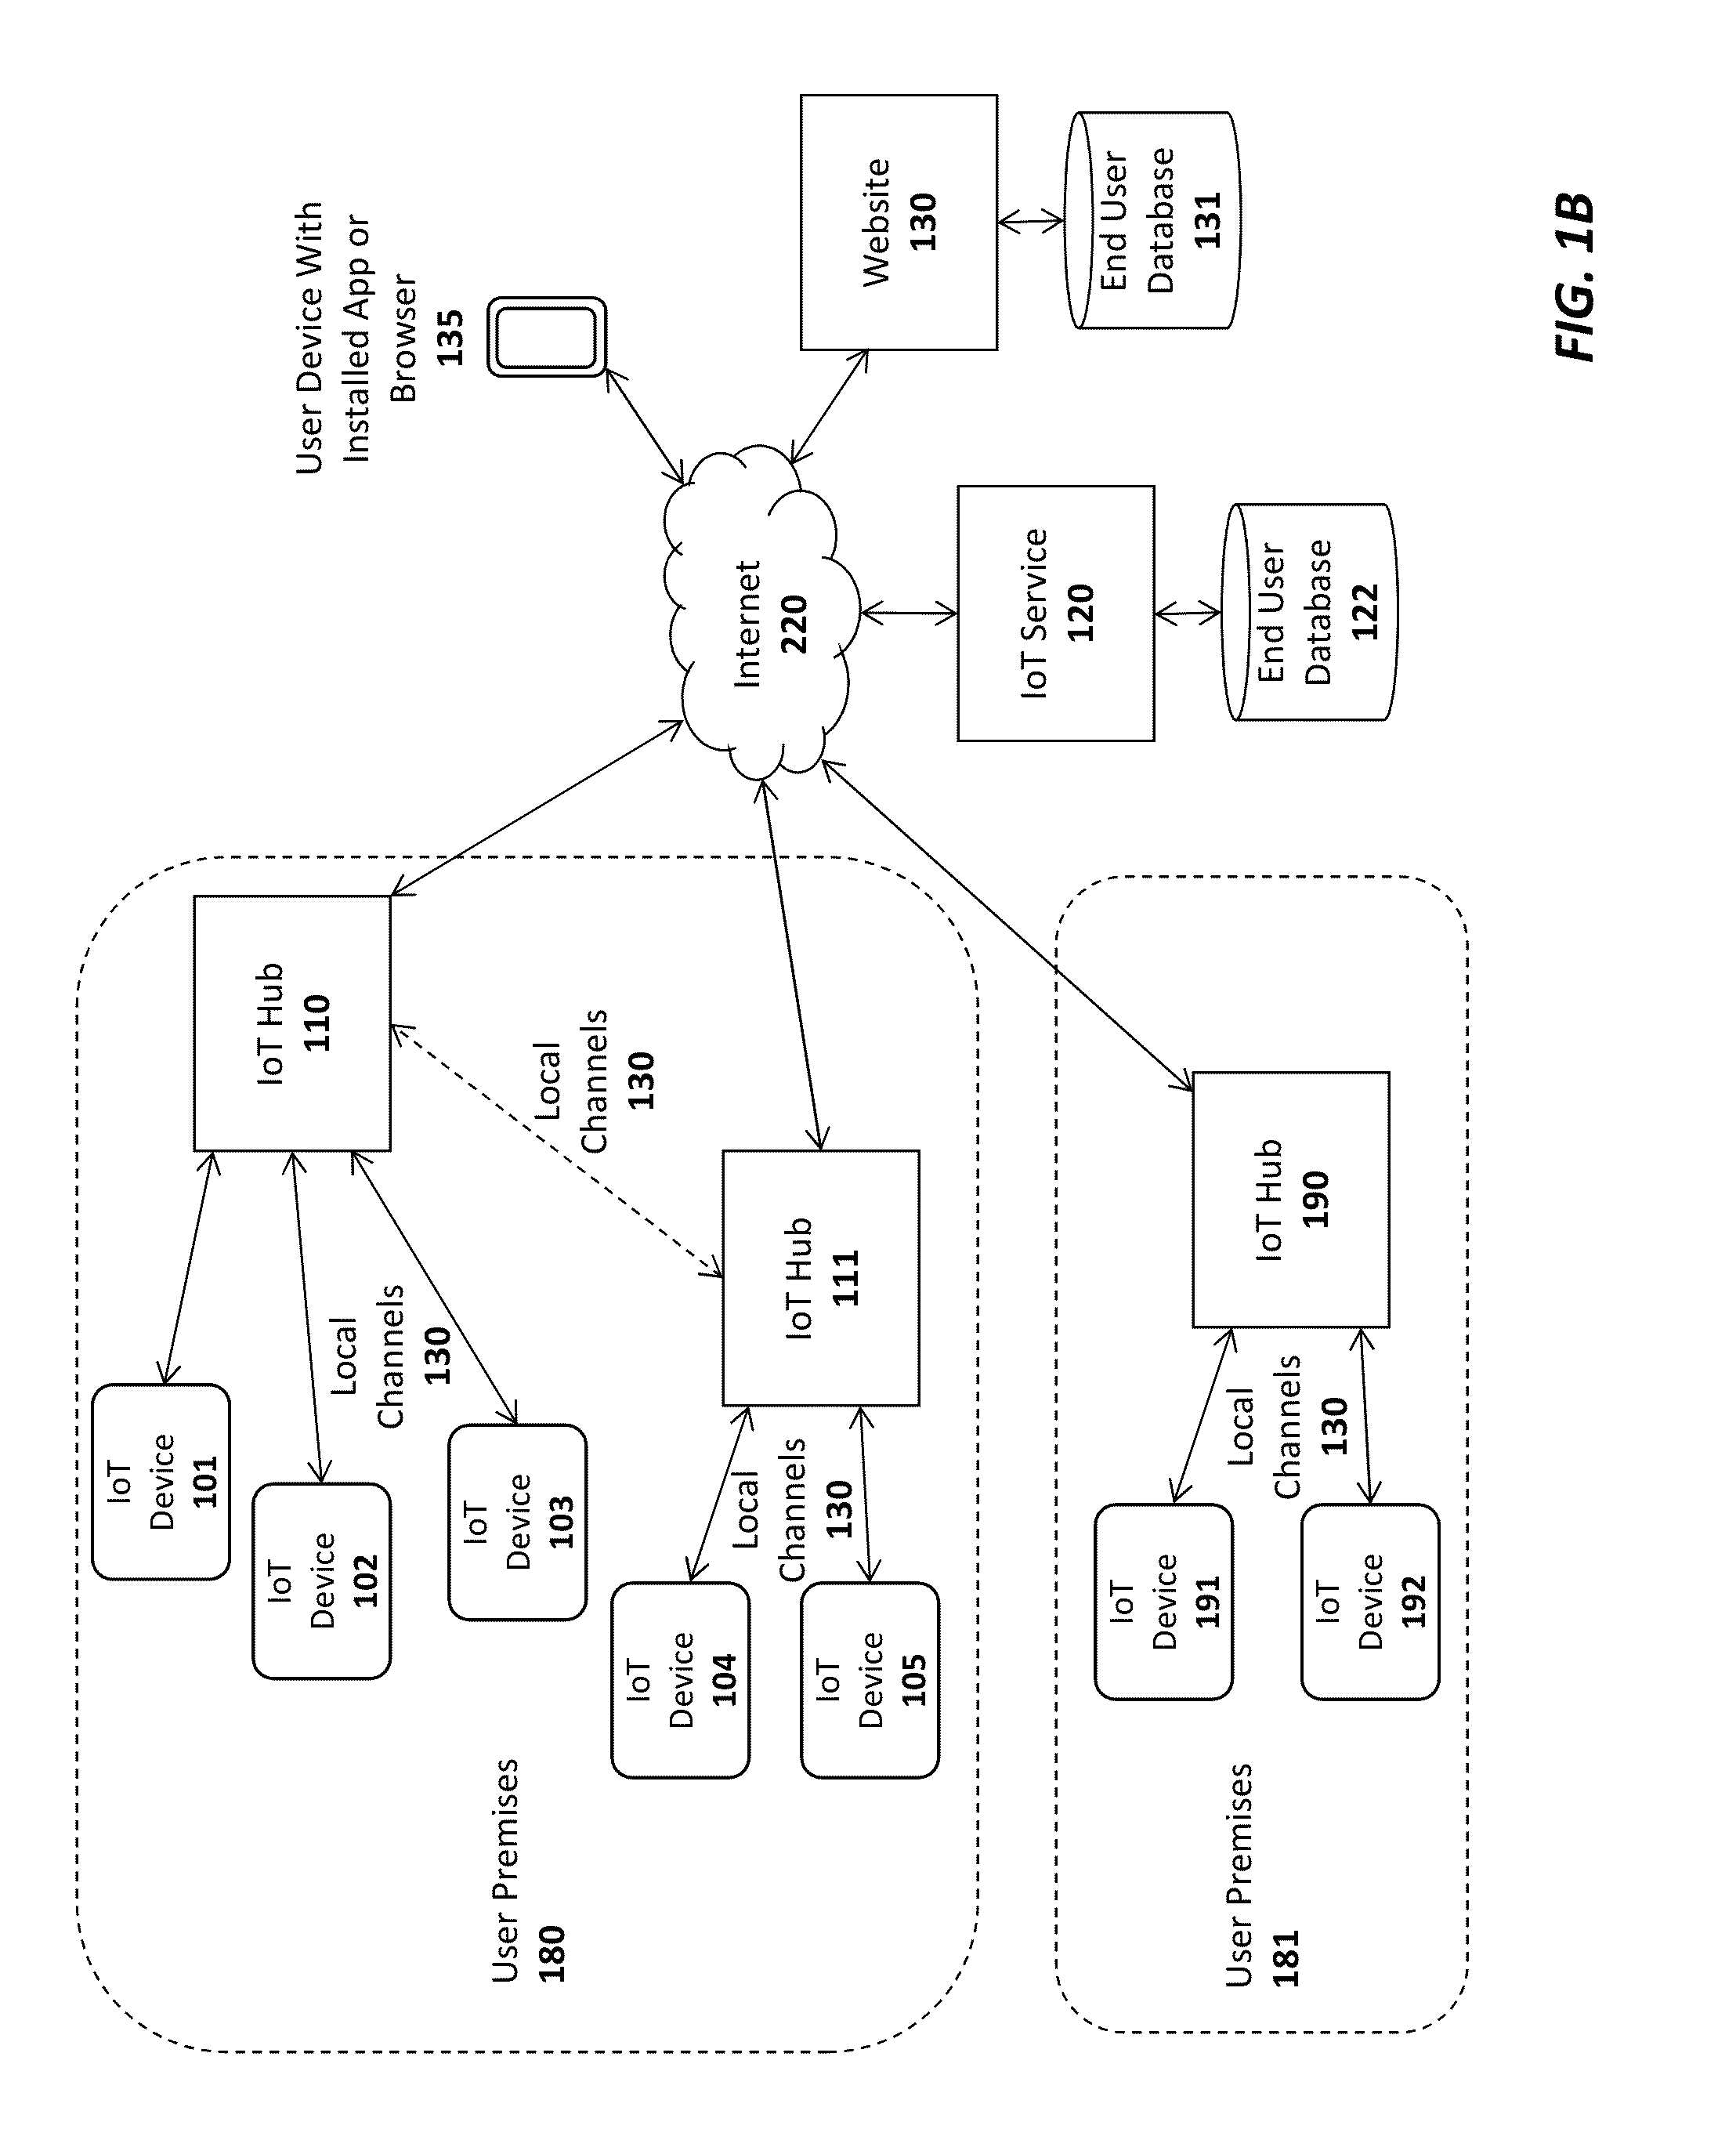 System and method for selecting a cell carrier to connect an IoT  hub